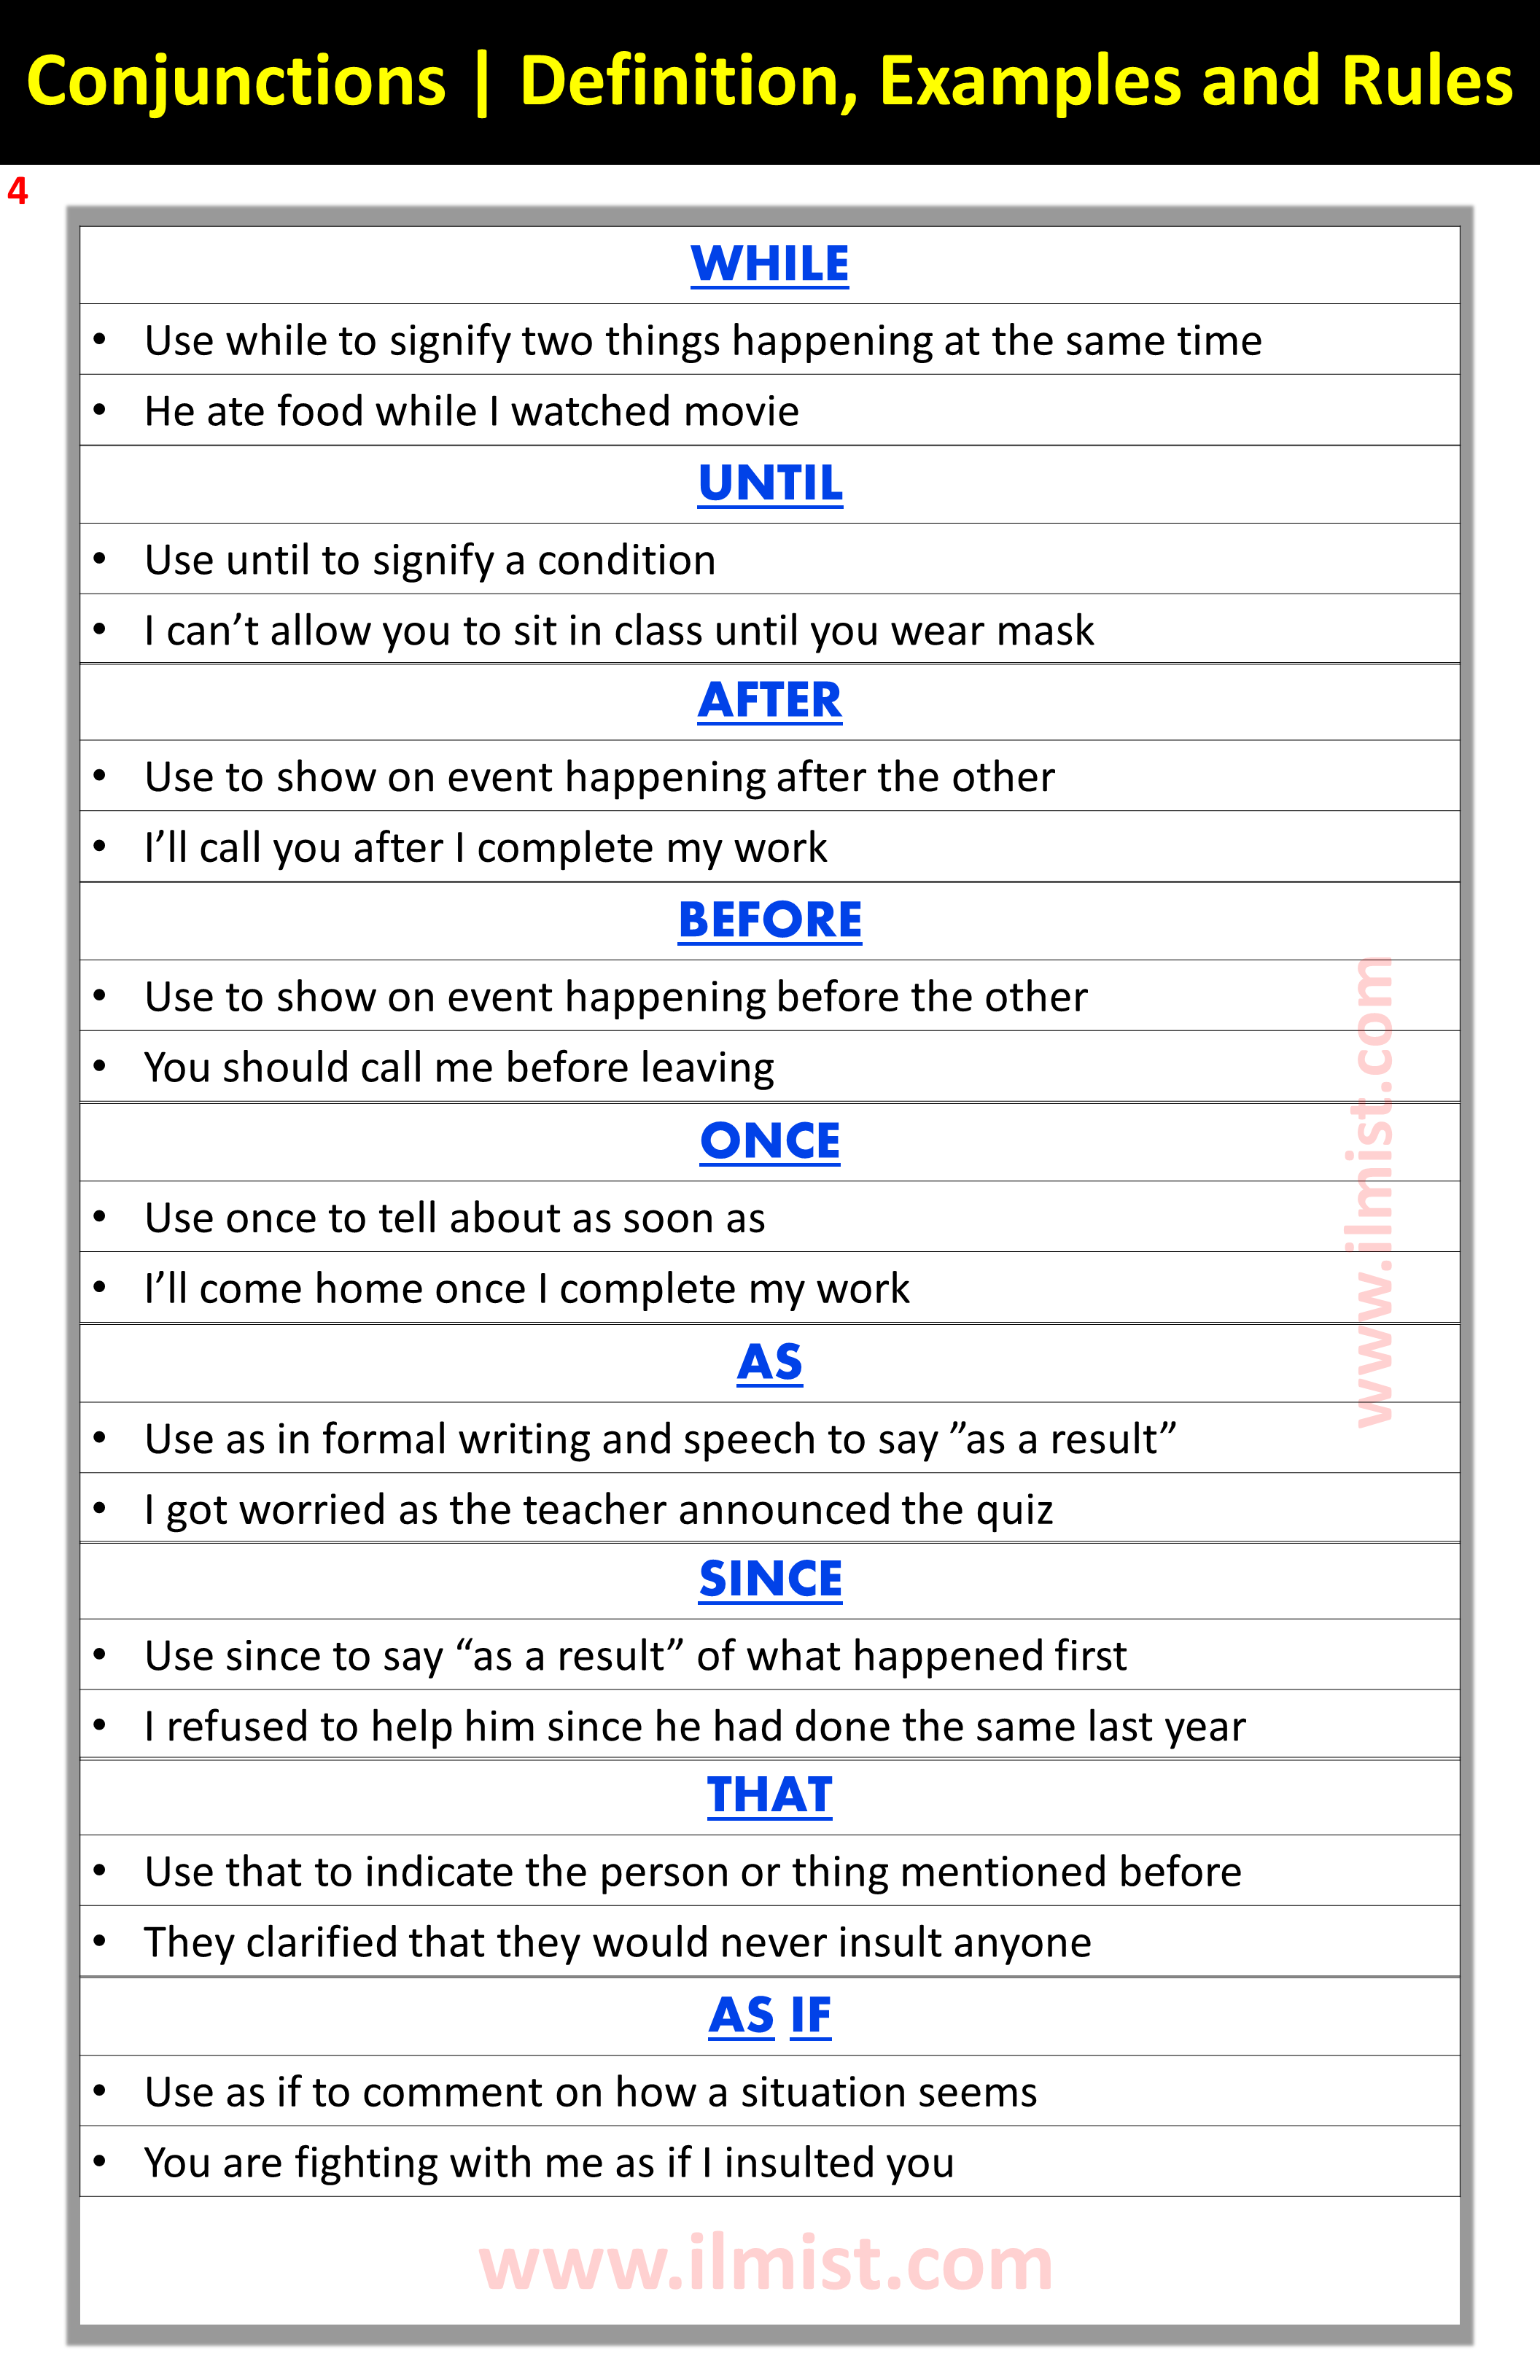 Conjunctions | Definition, Examples and Rules In English | Grammar